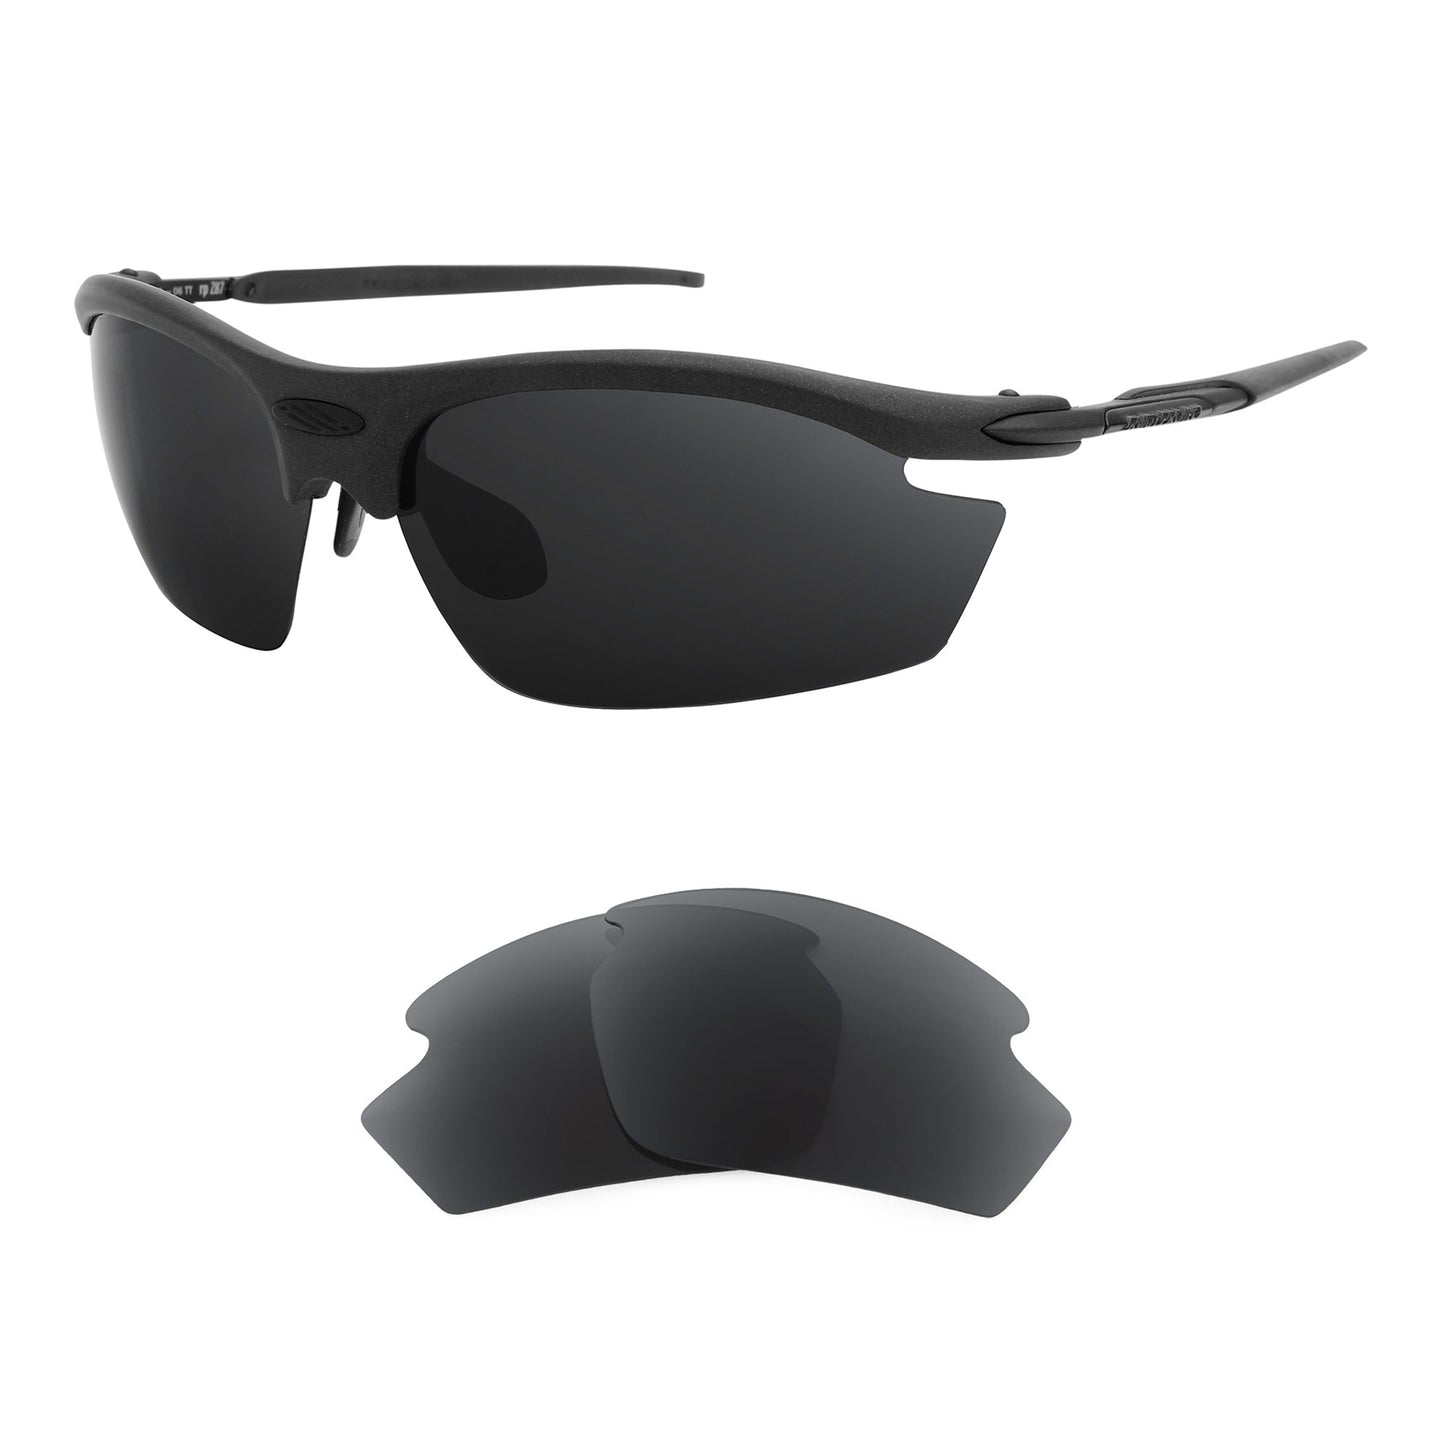 Rudy Project Rydon sunglasses with replacement lenses